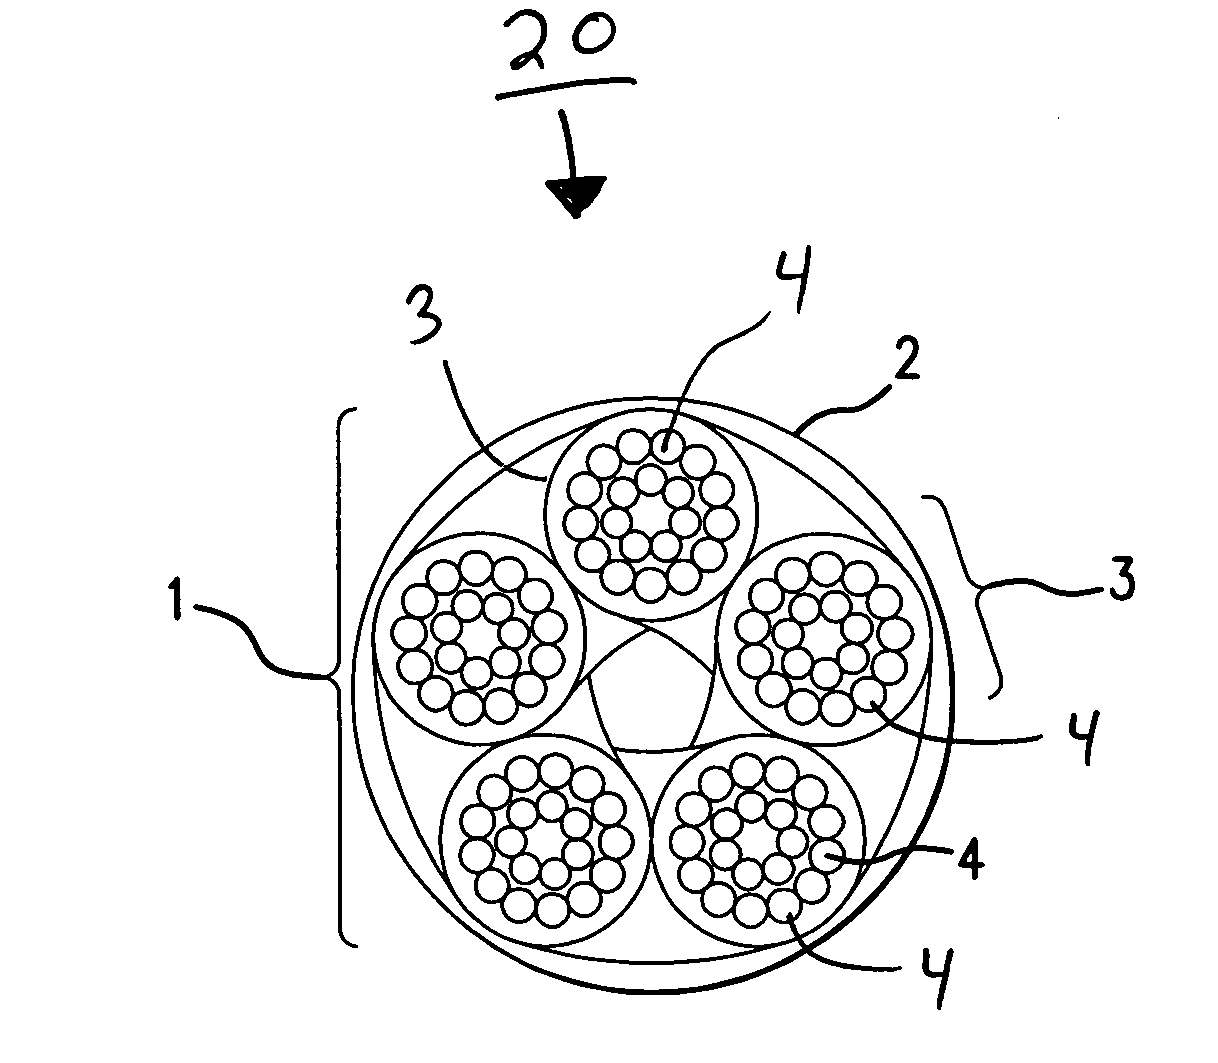 Synthetic sling whose component parts have opposing lays